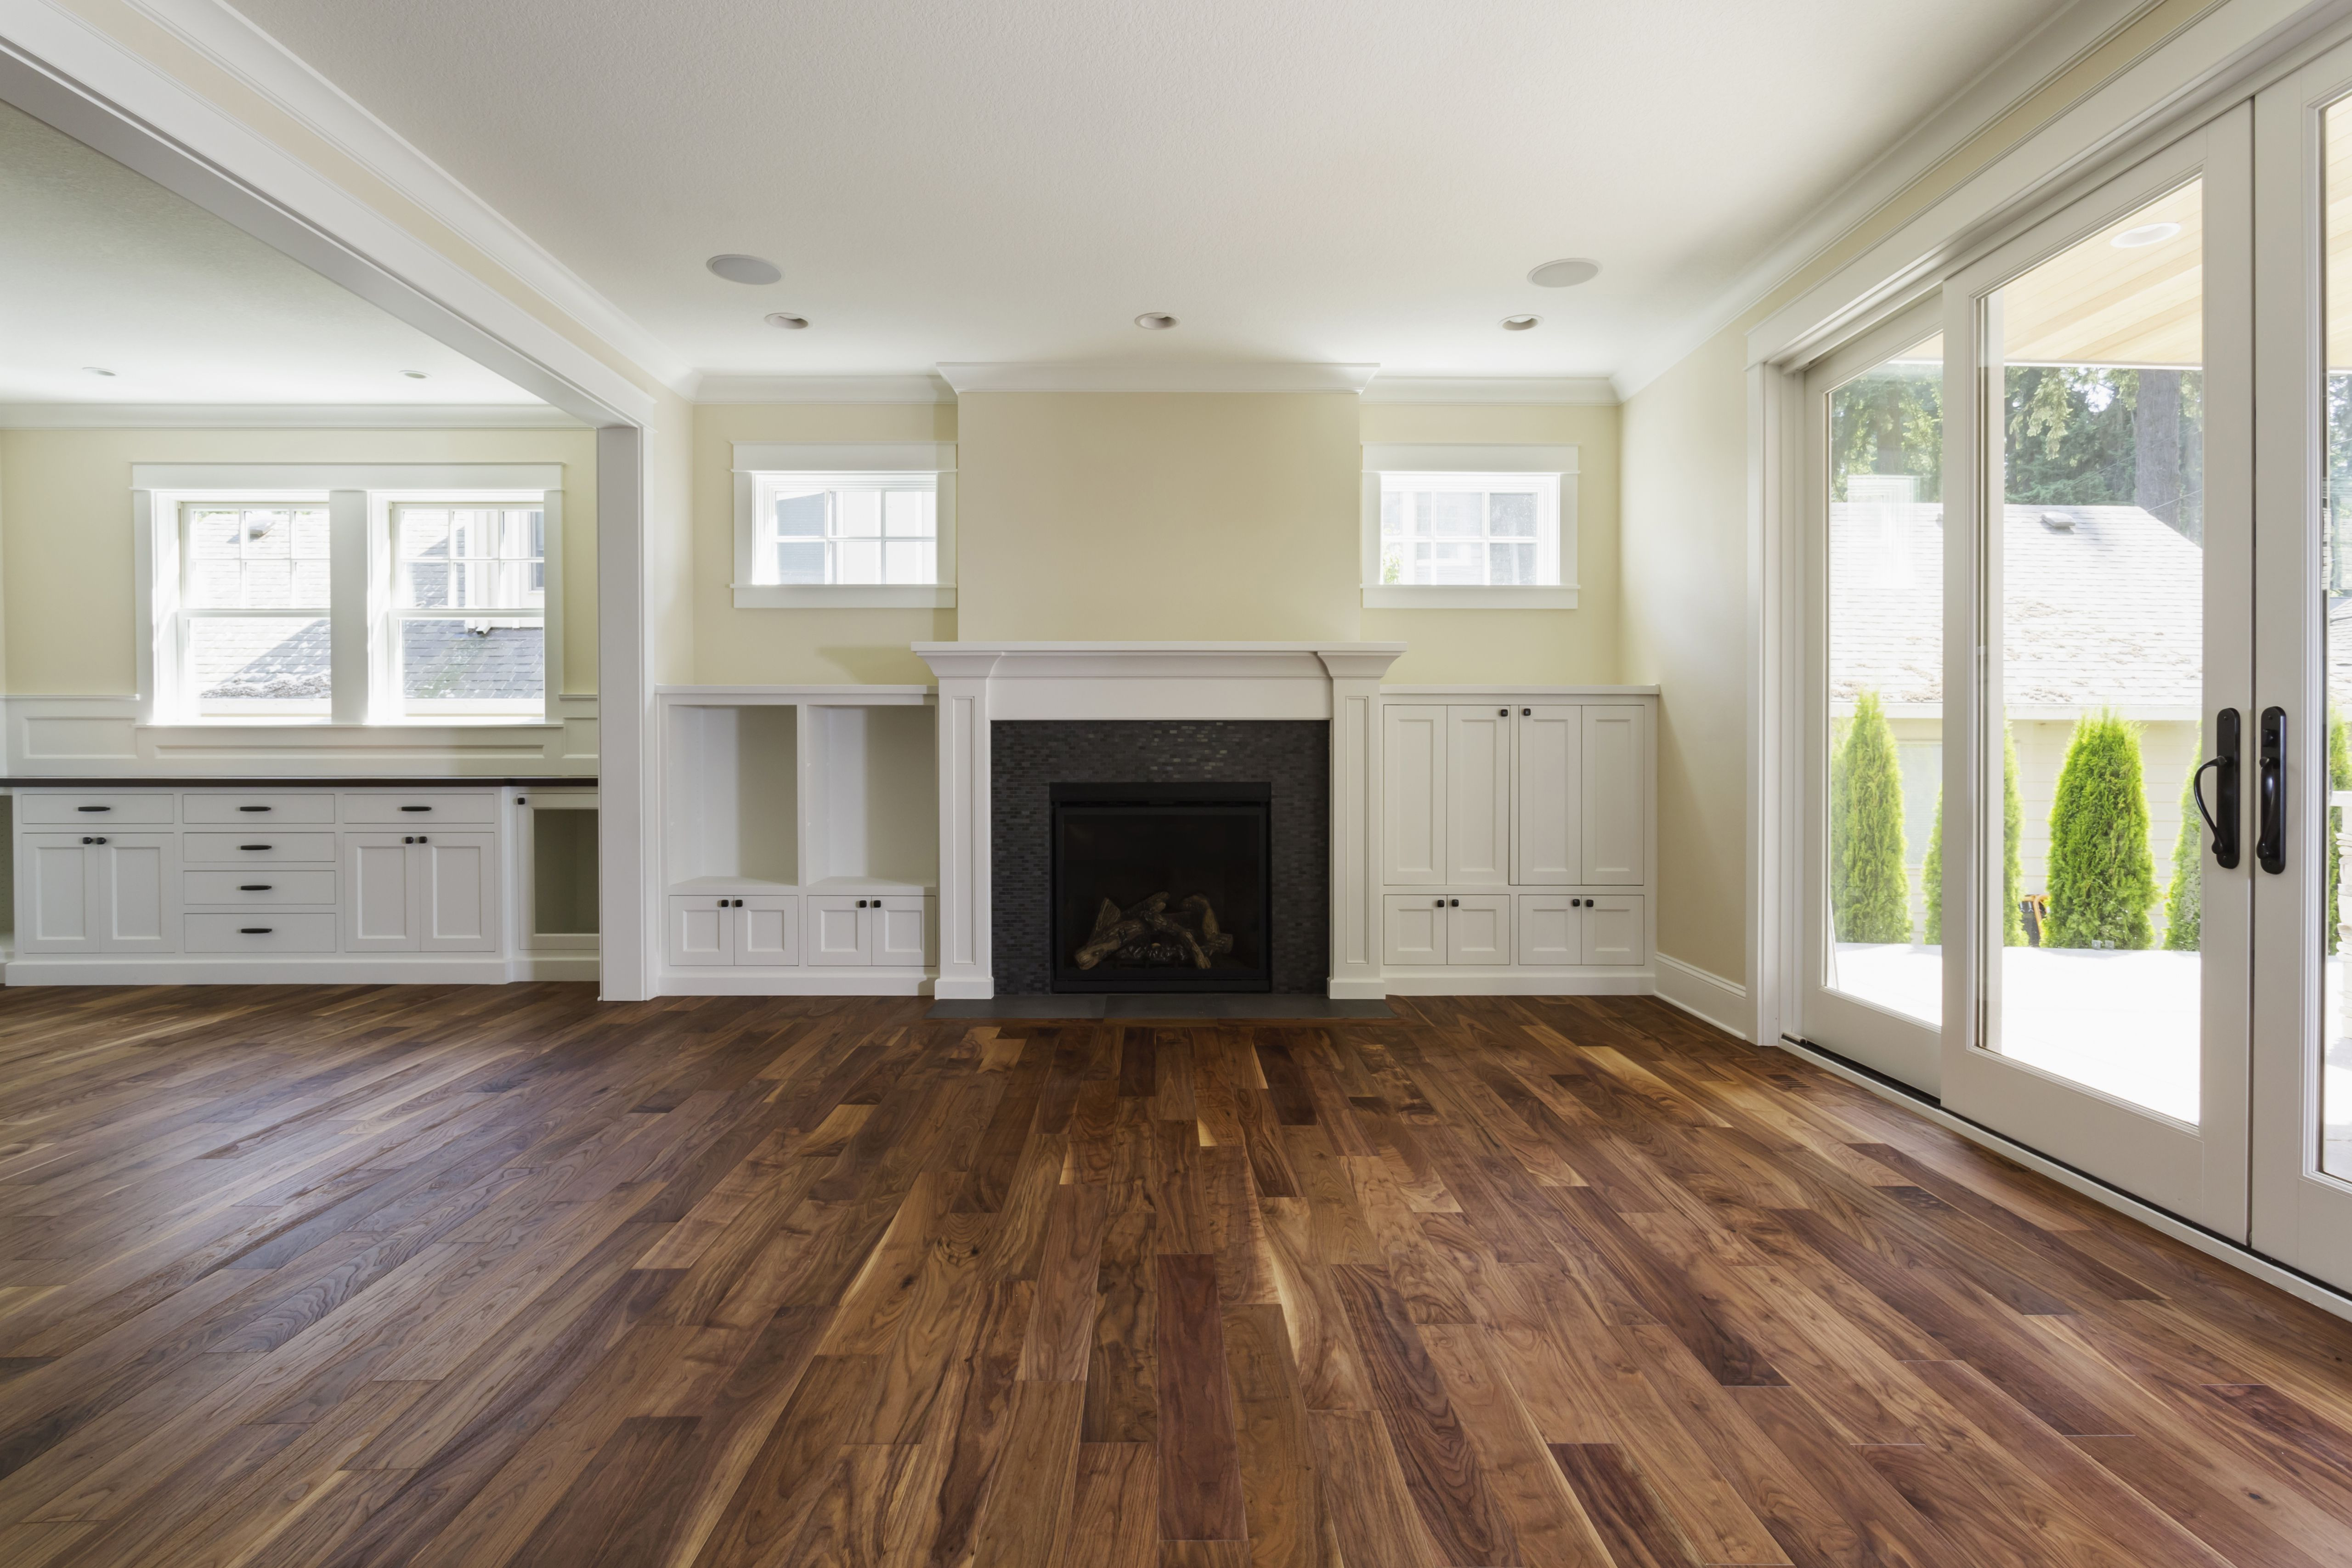 how to refinish hardwood floors diy of the pros and cons of prefinished hardwood flooring within fireplace and built in shelves in living room 482143011 57bef8e33df78cc16e035397